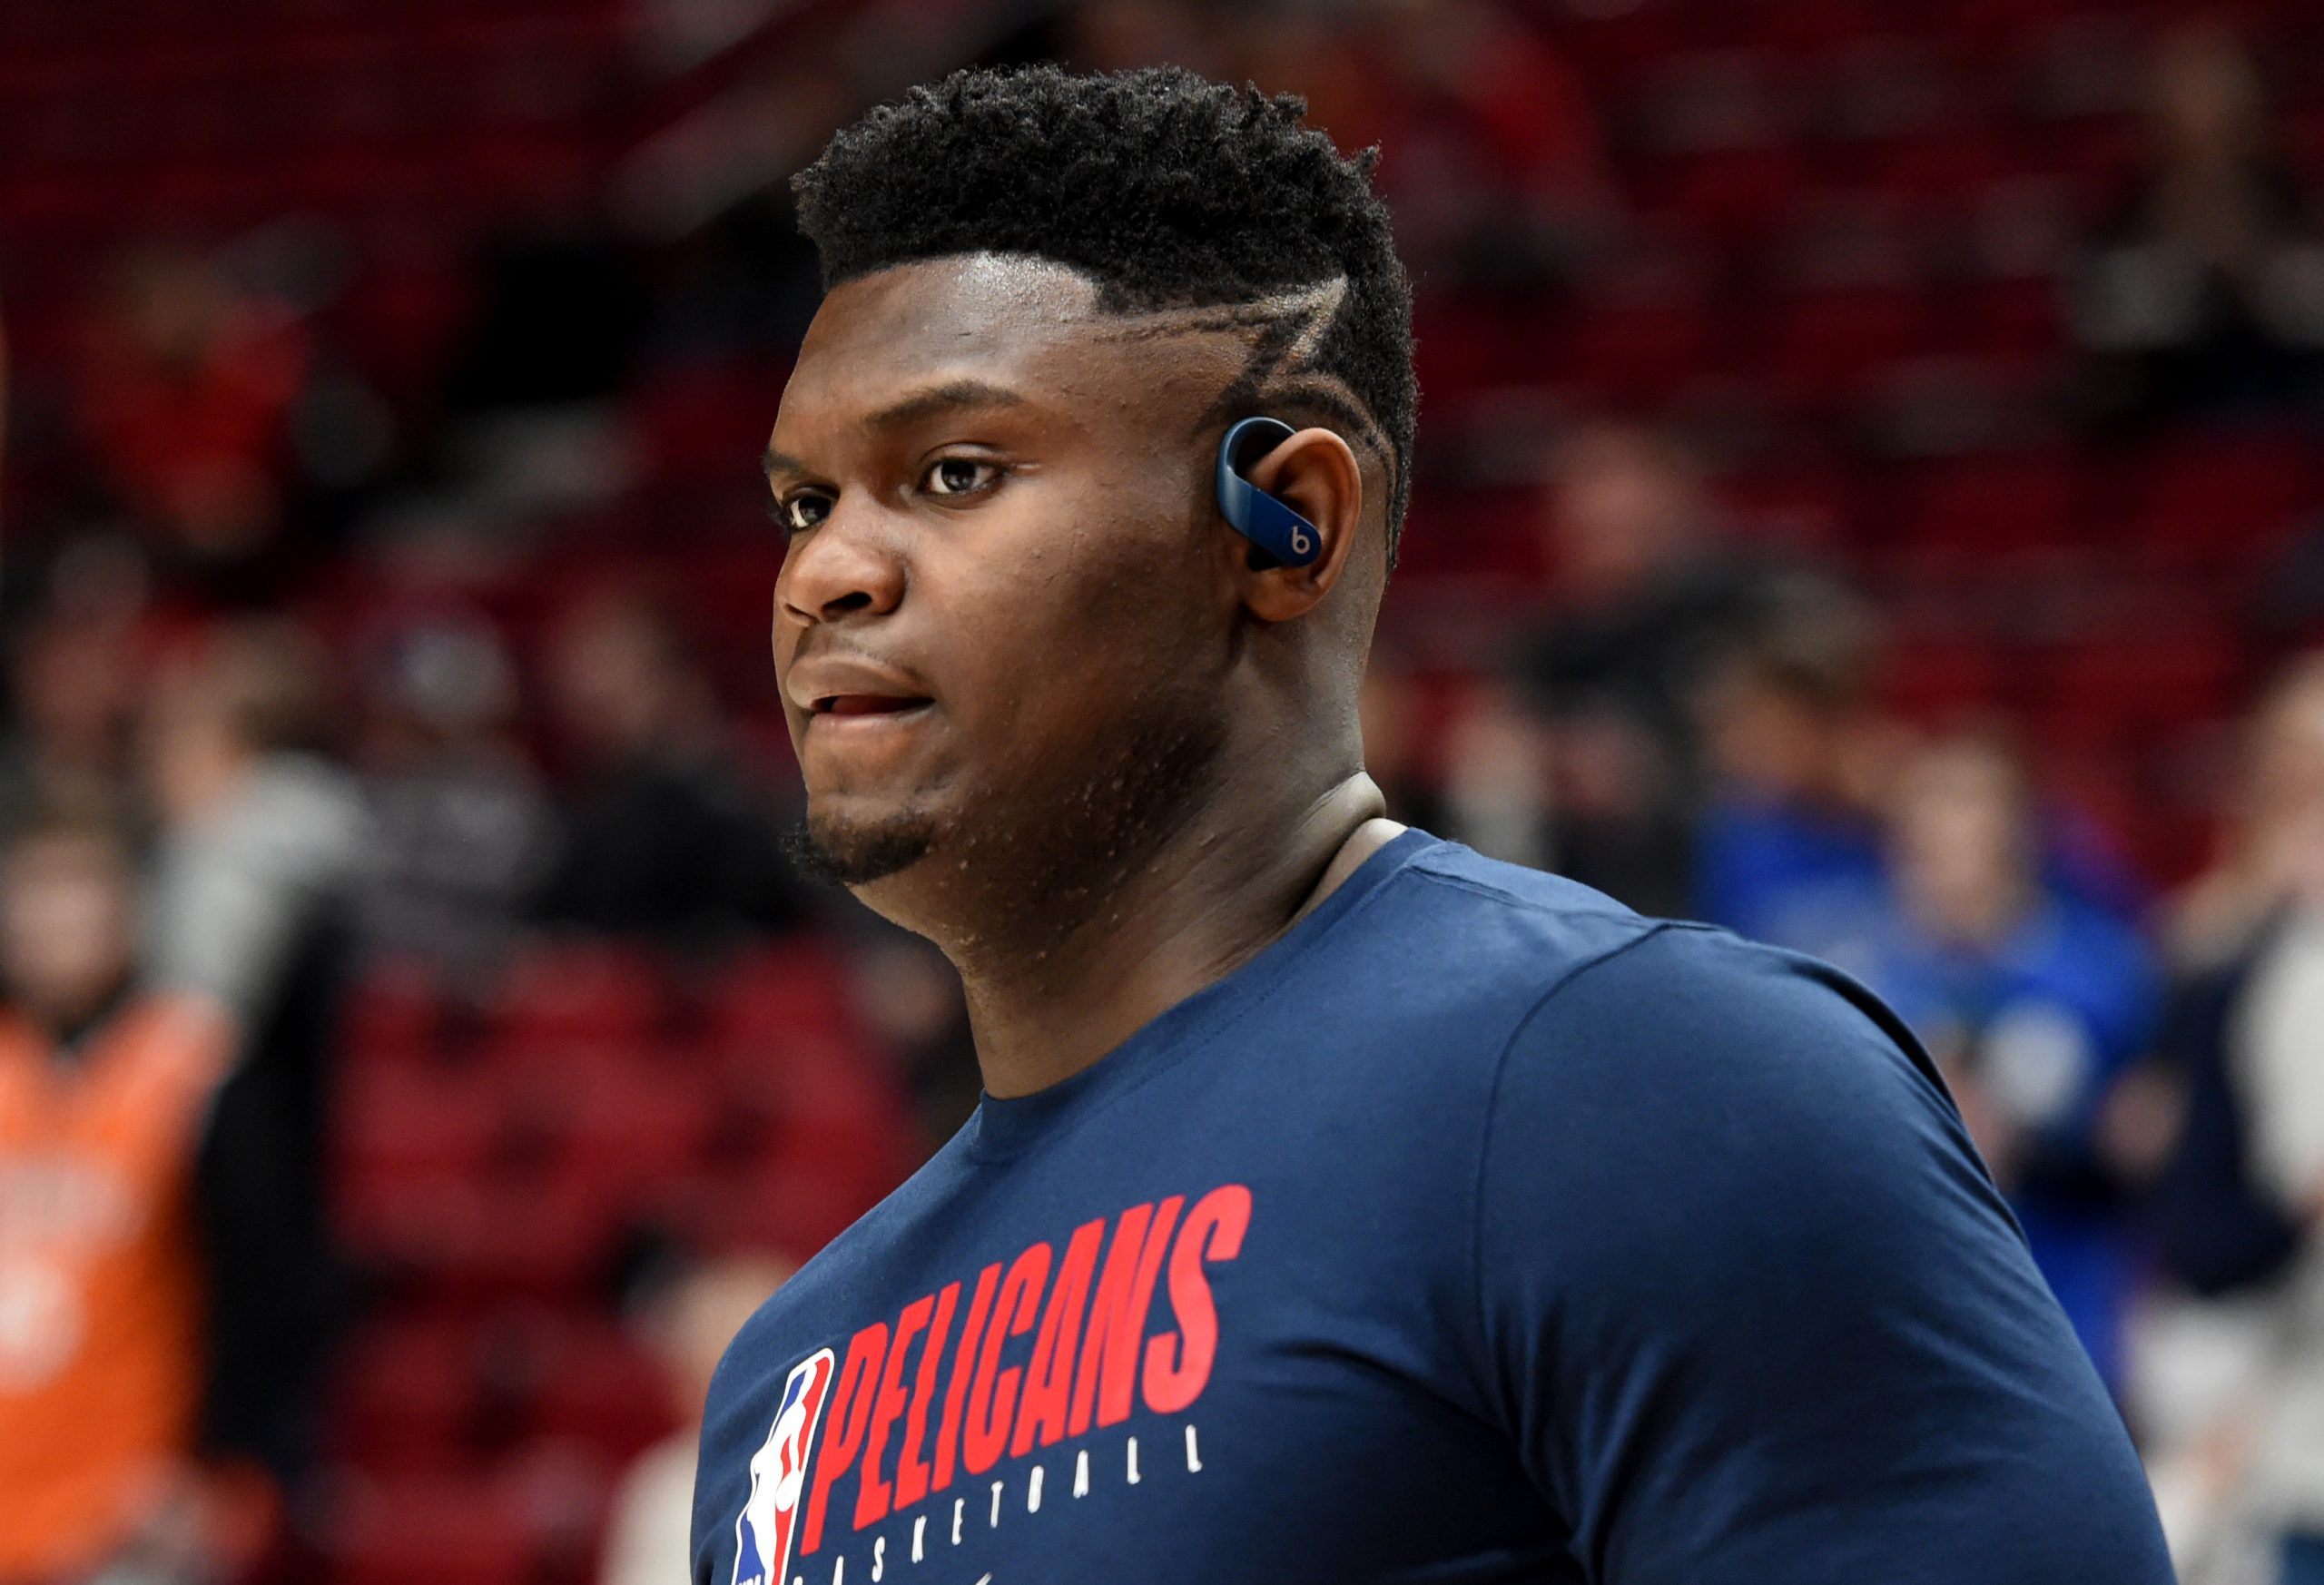 Zion Williamson Ruled By Judge To Answer Questions Under Oath About Duke Benefits | SportsLingo